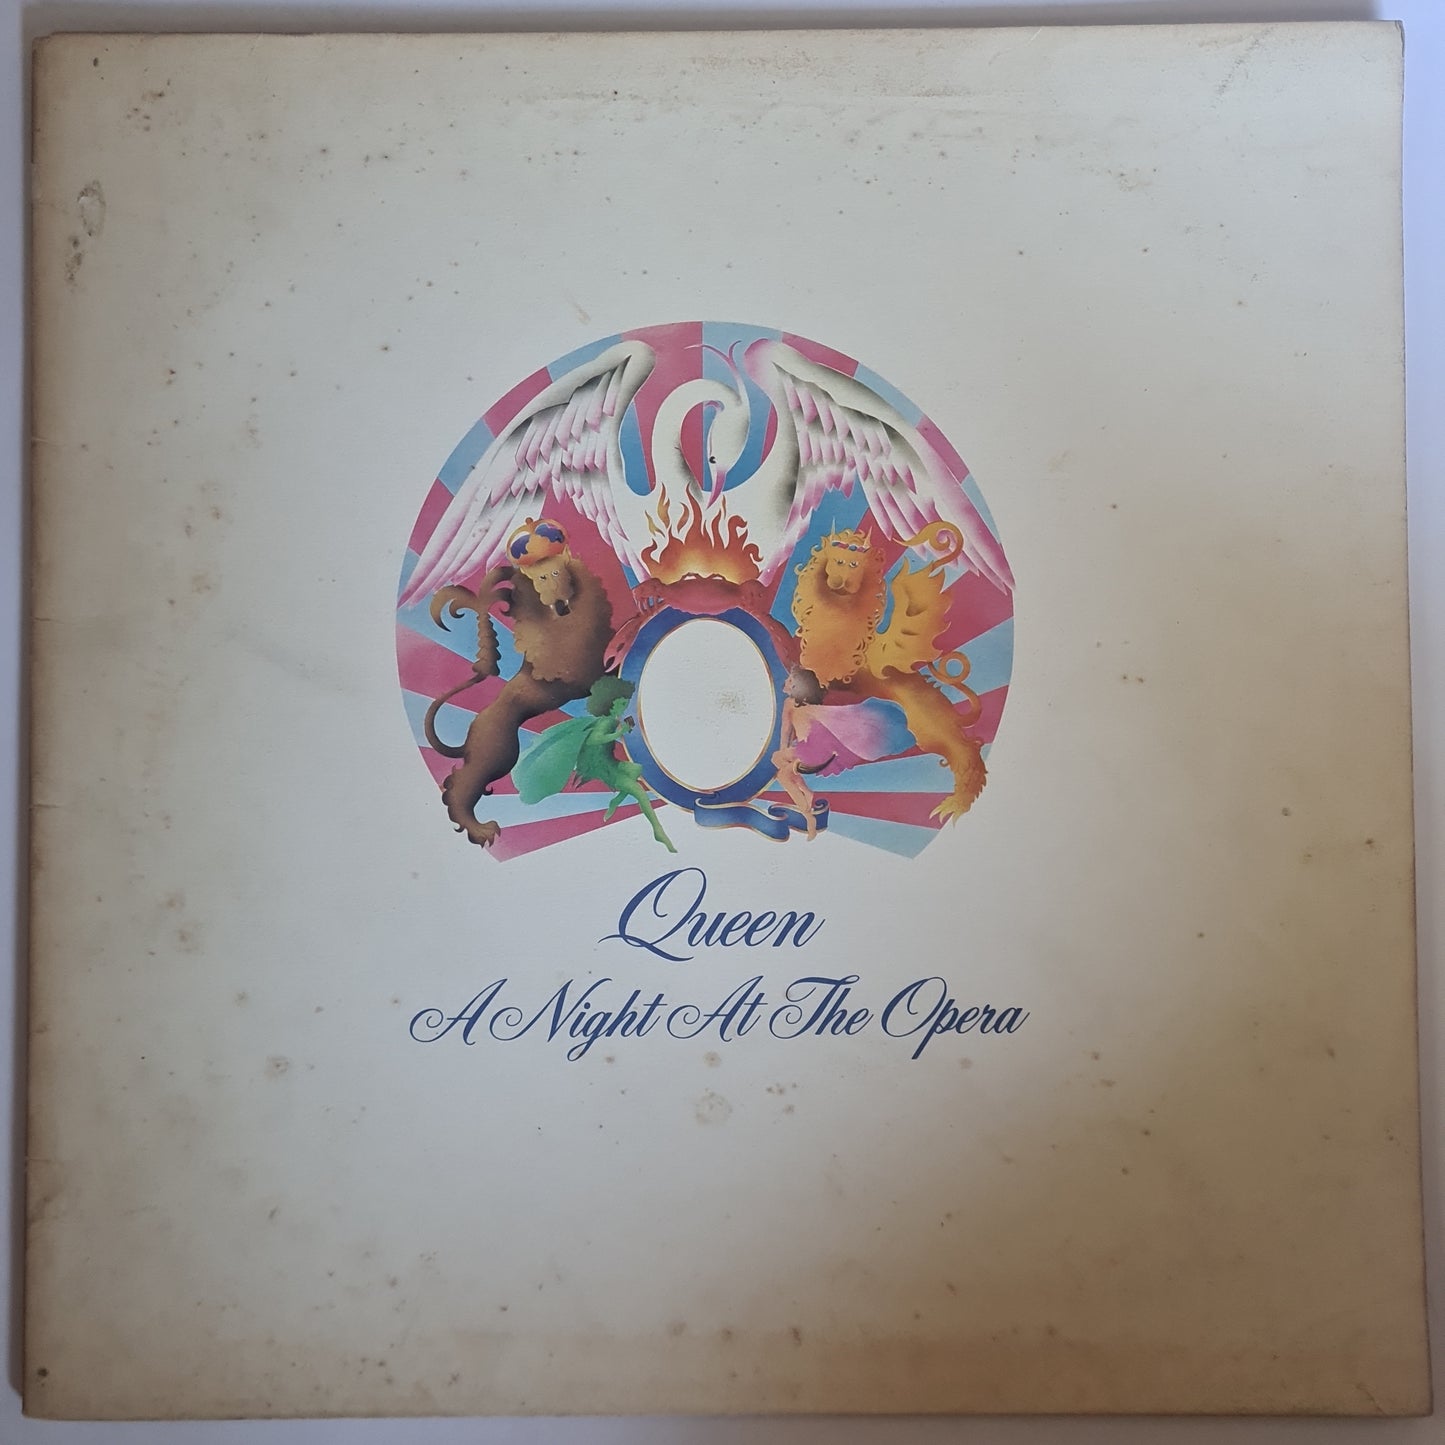 Queen – A Night At The Opera - 1975 - Vinyl Record